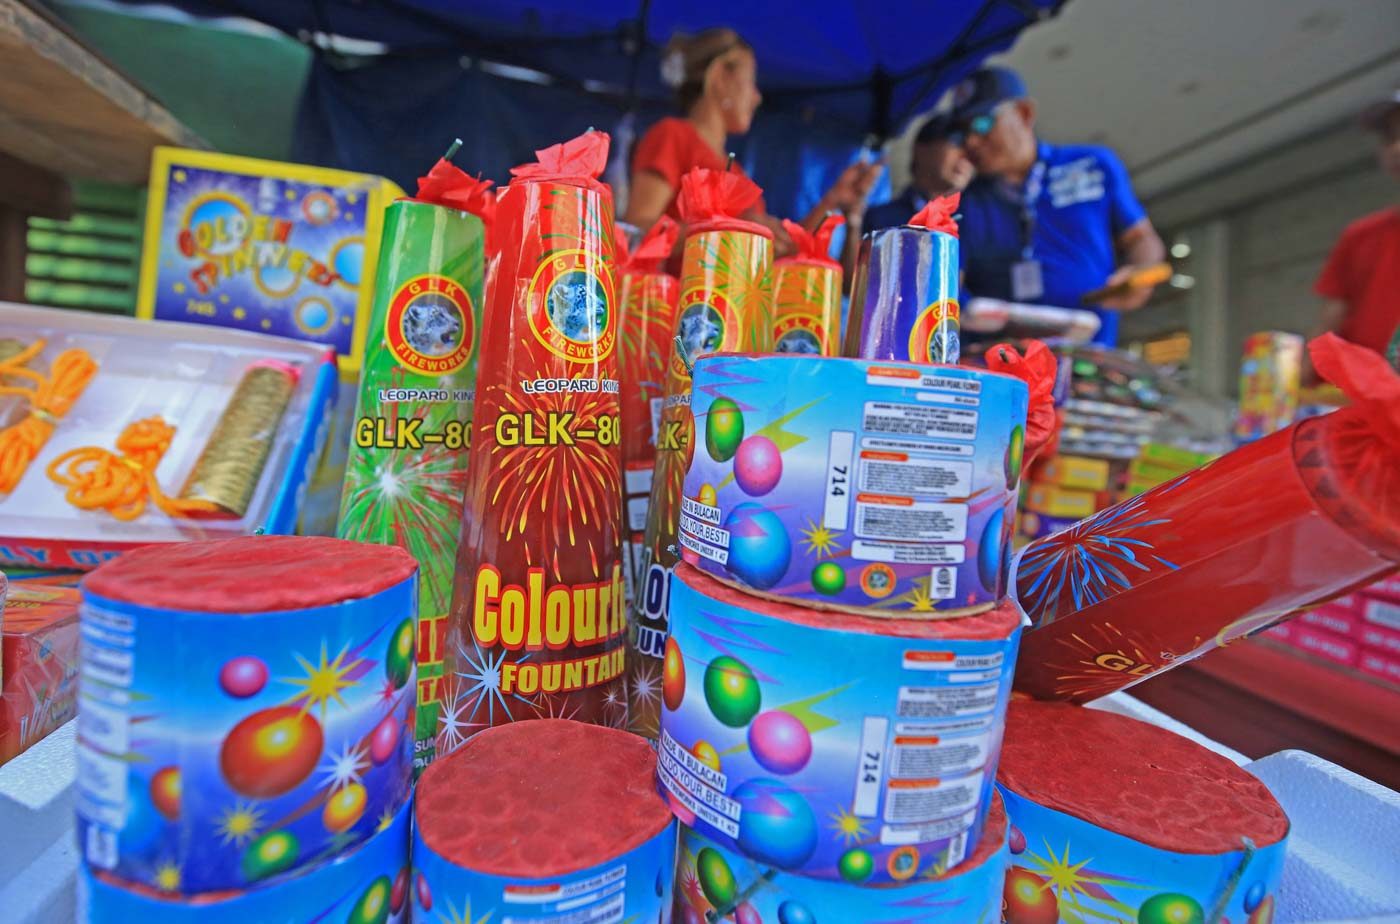 Police on lookout for illegal firecrackers ahead of New Year revelries